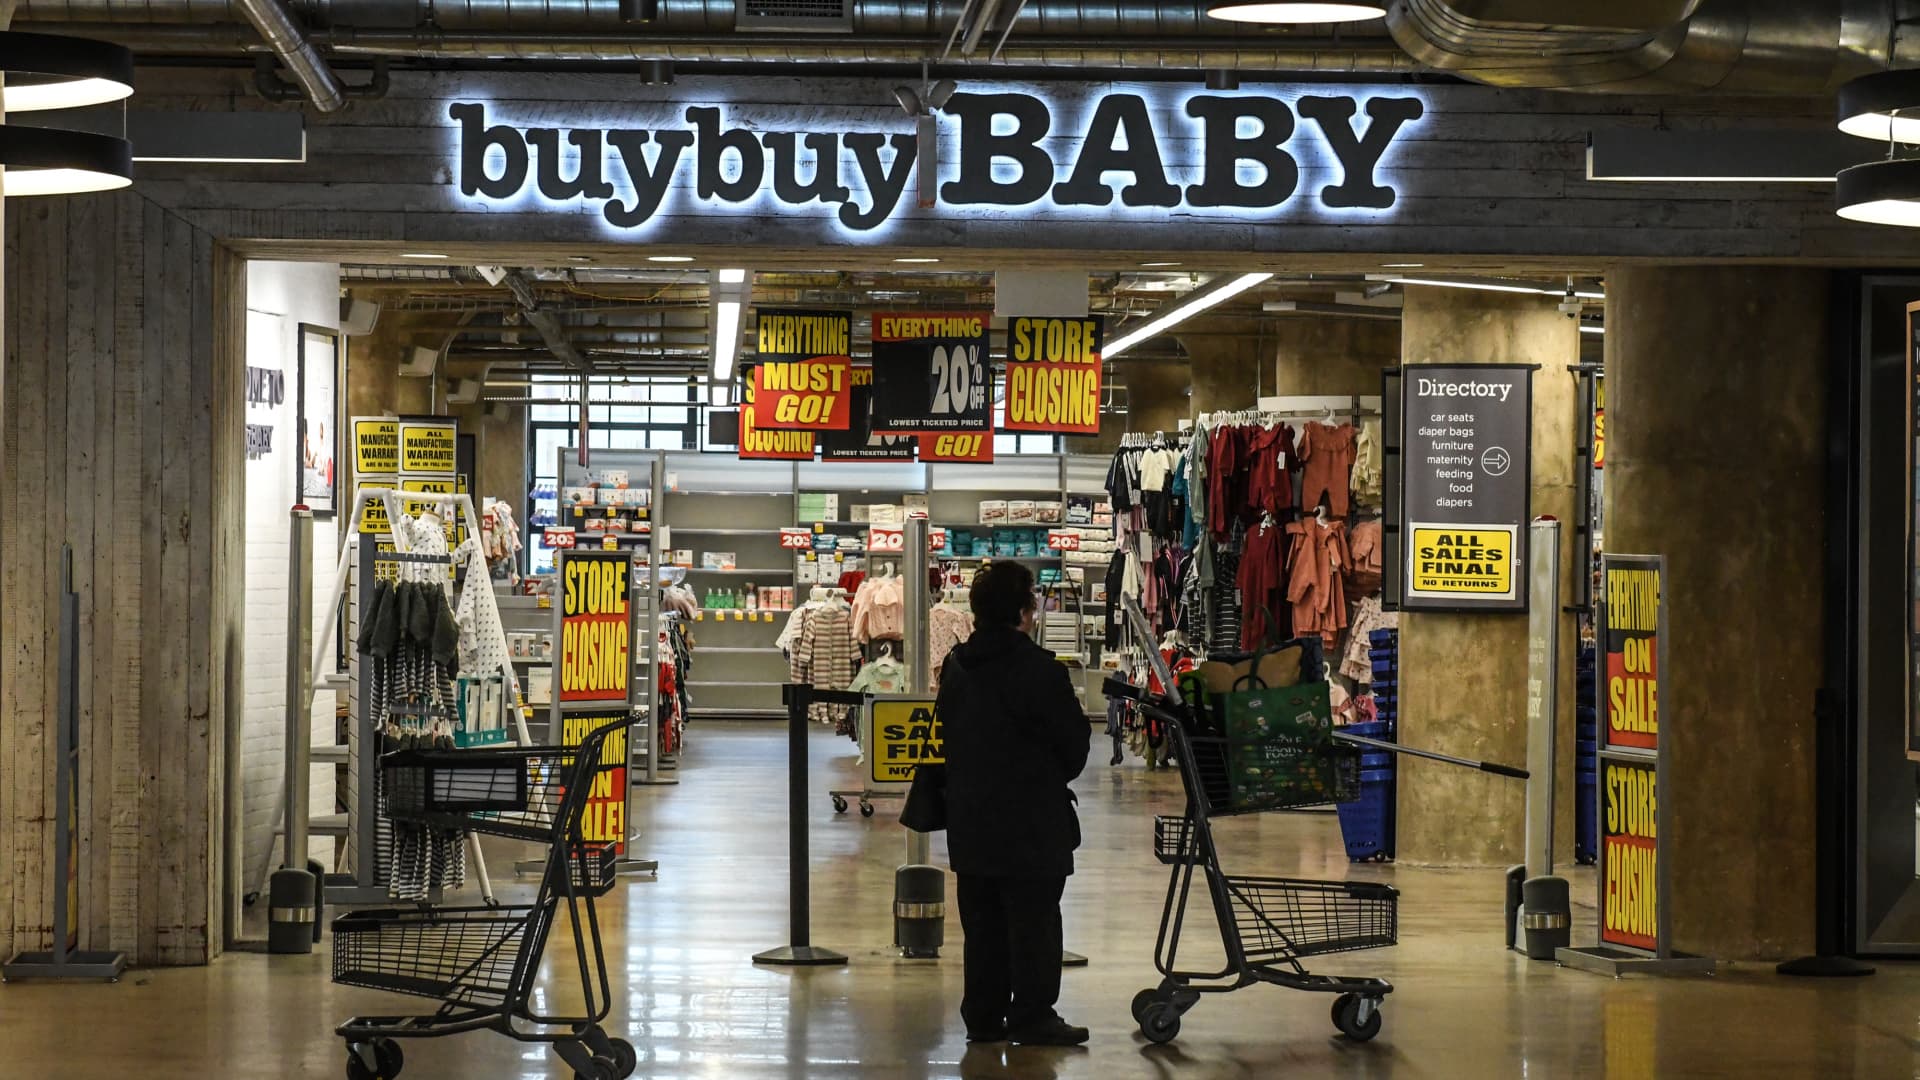 Buy Buy Baby auction canceled but bidders still interested